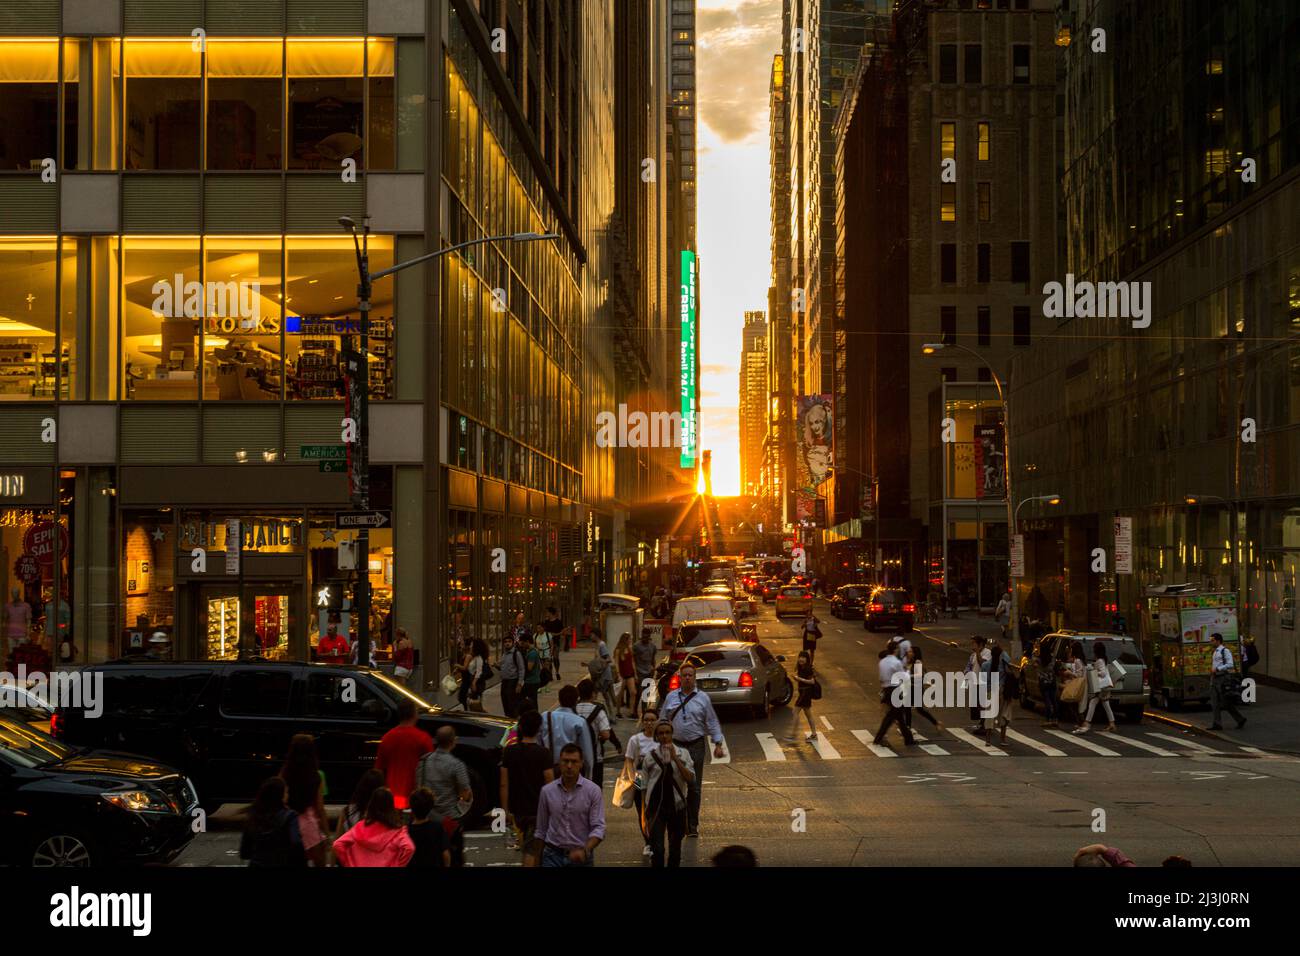 6TH AVE/W41ST ST, New York City, NY, USA, Manhattanhenge in New York City, along the 41st street. Manhattanhenge is an event during which the setting sun is aligned with the main street grid of Manhattan Stock Photo